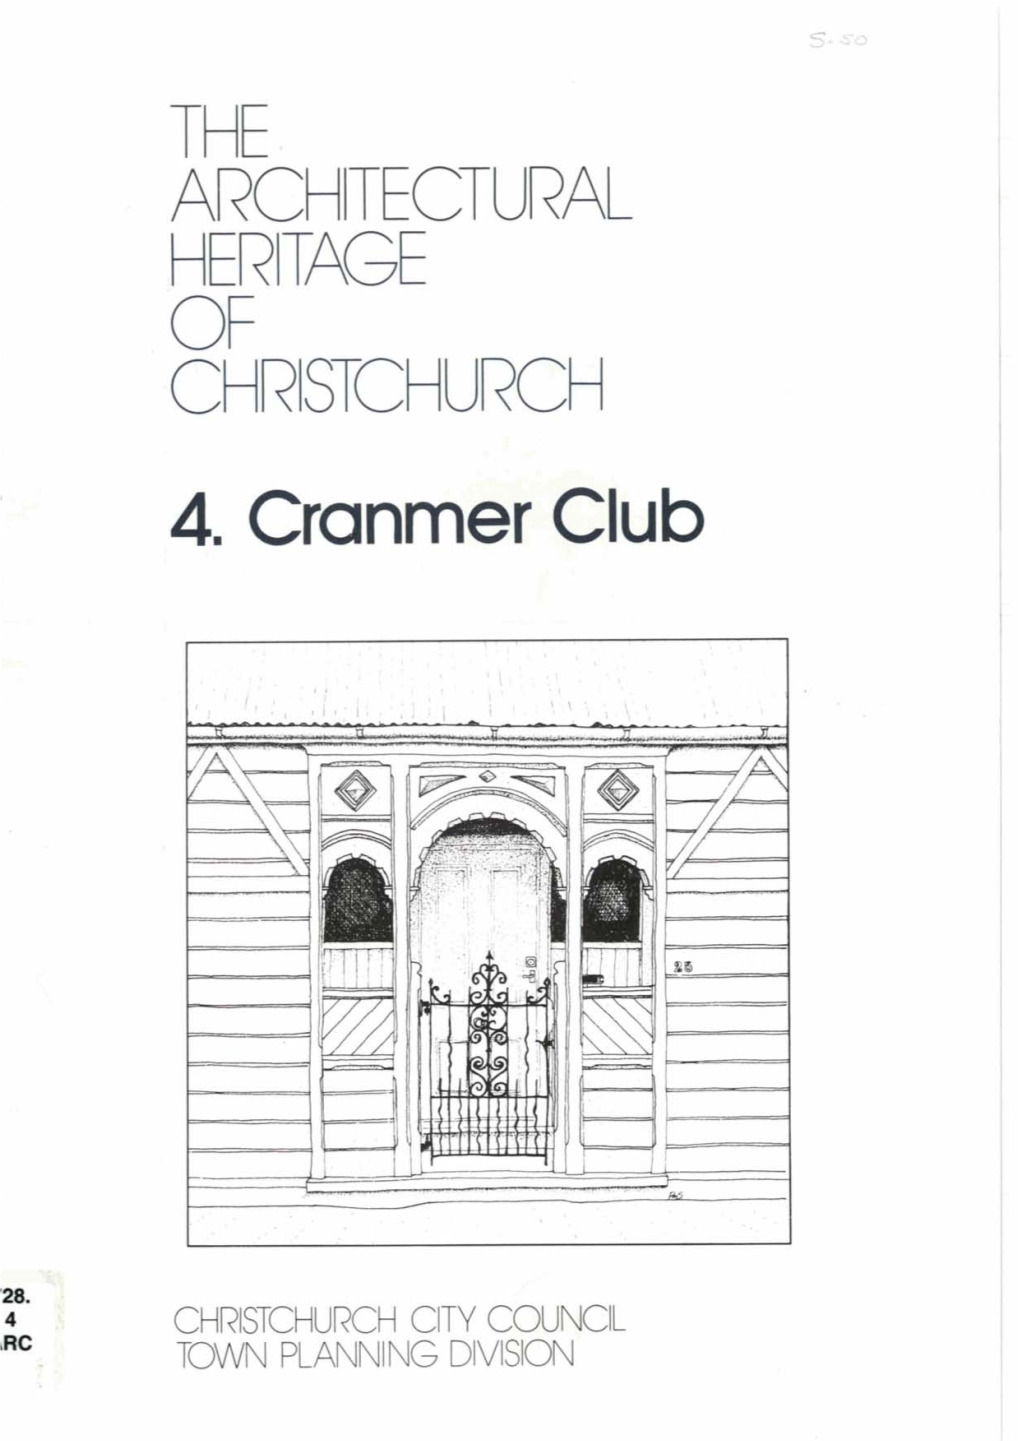 Cranmer Club Introduction the Cranmer Club Stands at 25 Armagh Street on the South-West Corner of Cranmer Square